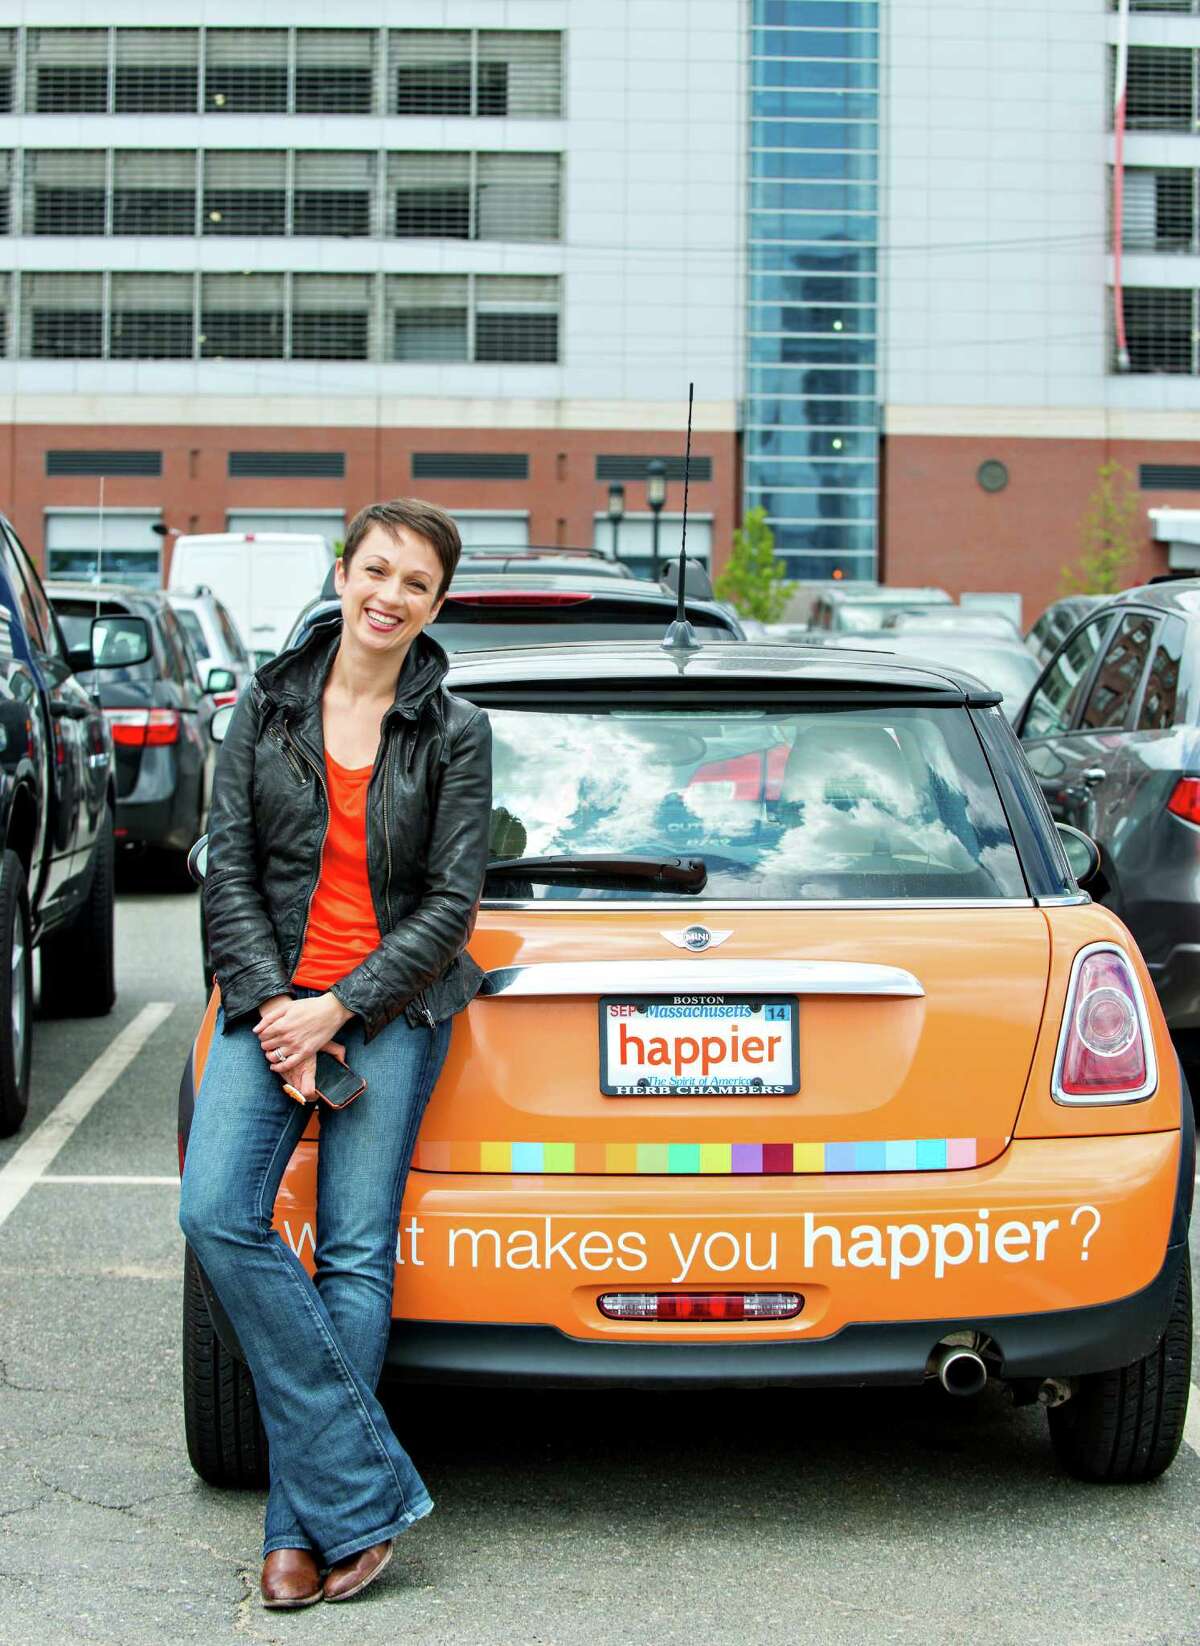 If Facebook's official color is blue, Happier's is orange. Nataly Kogan, the creator of the Happier app and website, drives an orange Mini Cooper to promote her social network.